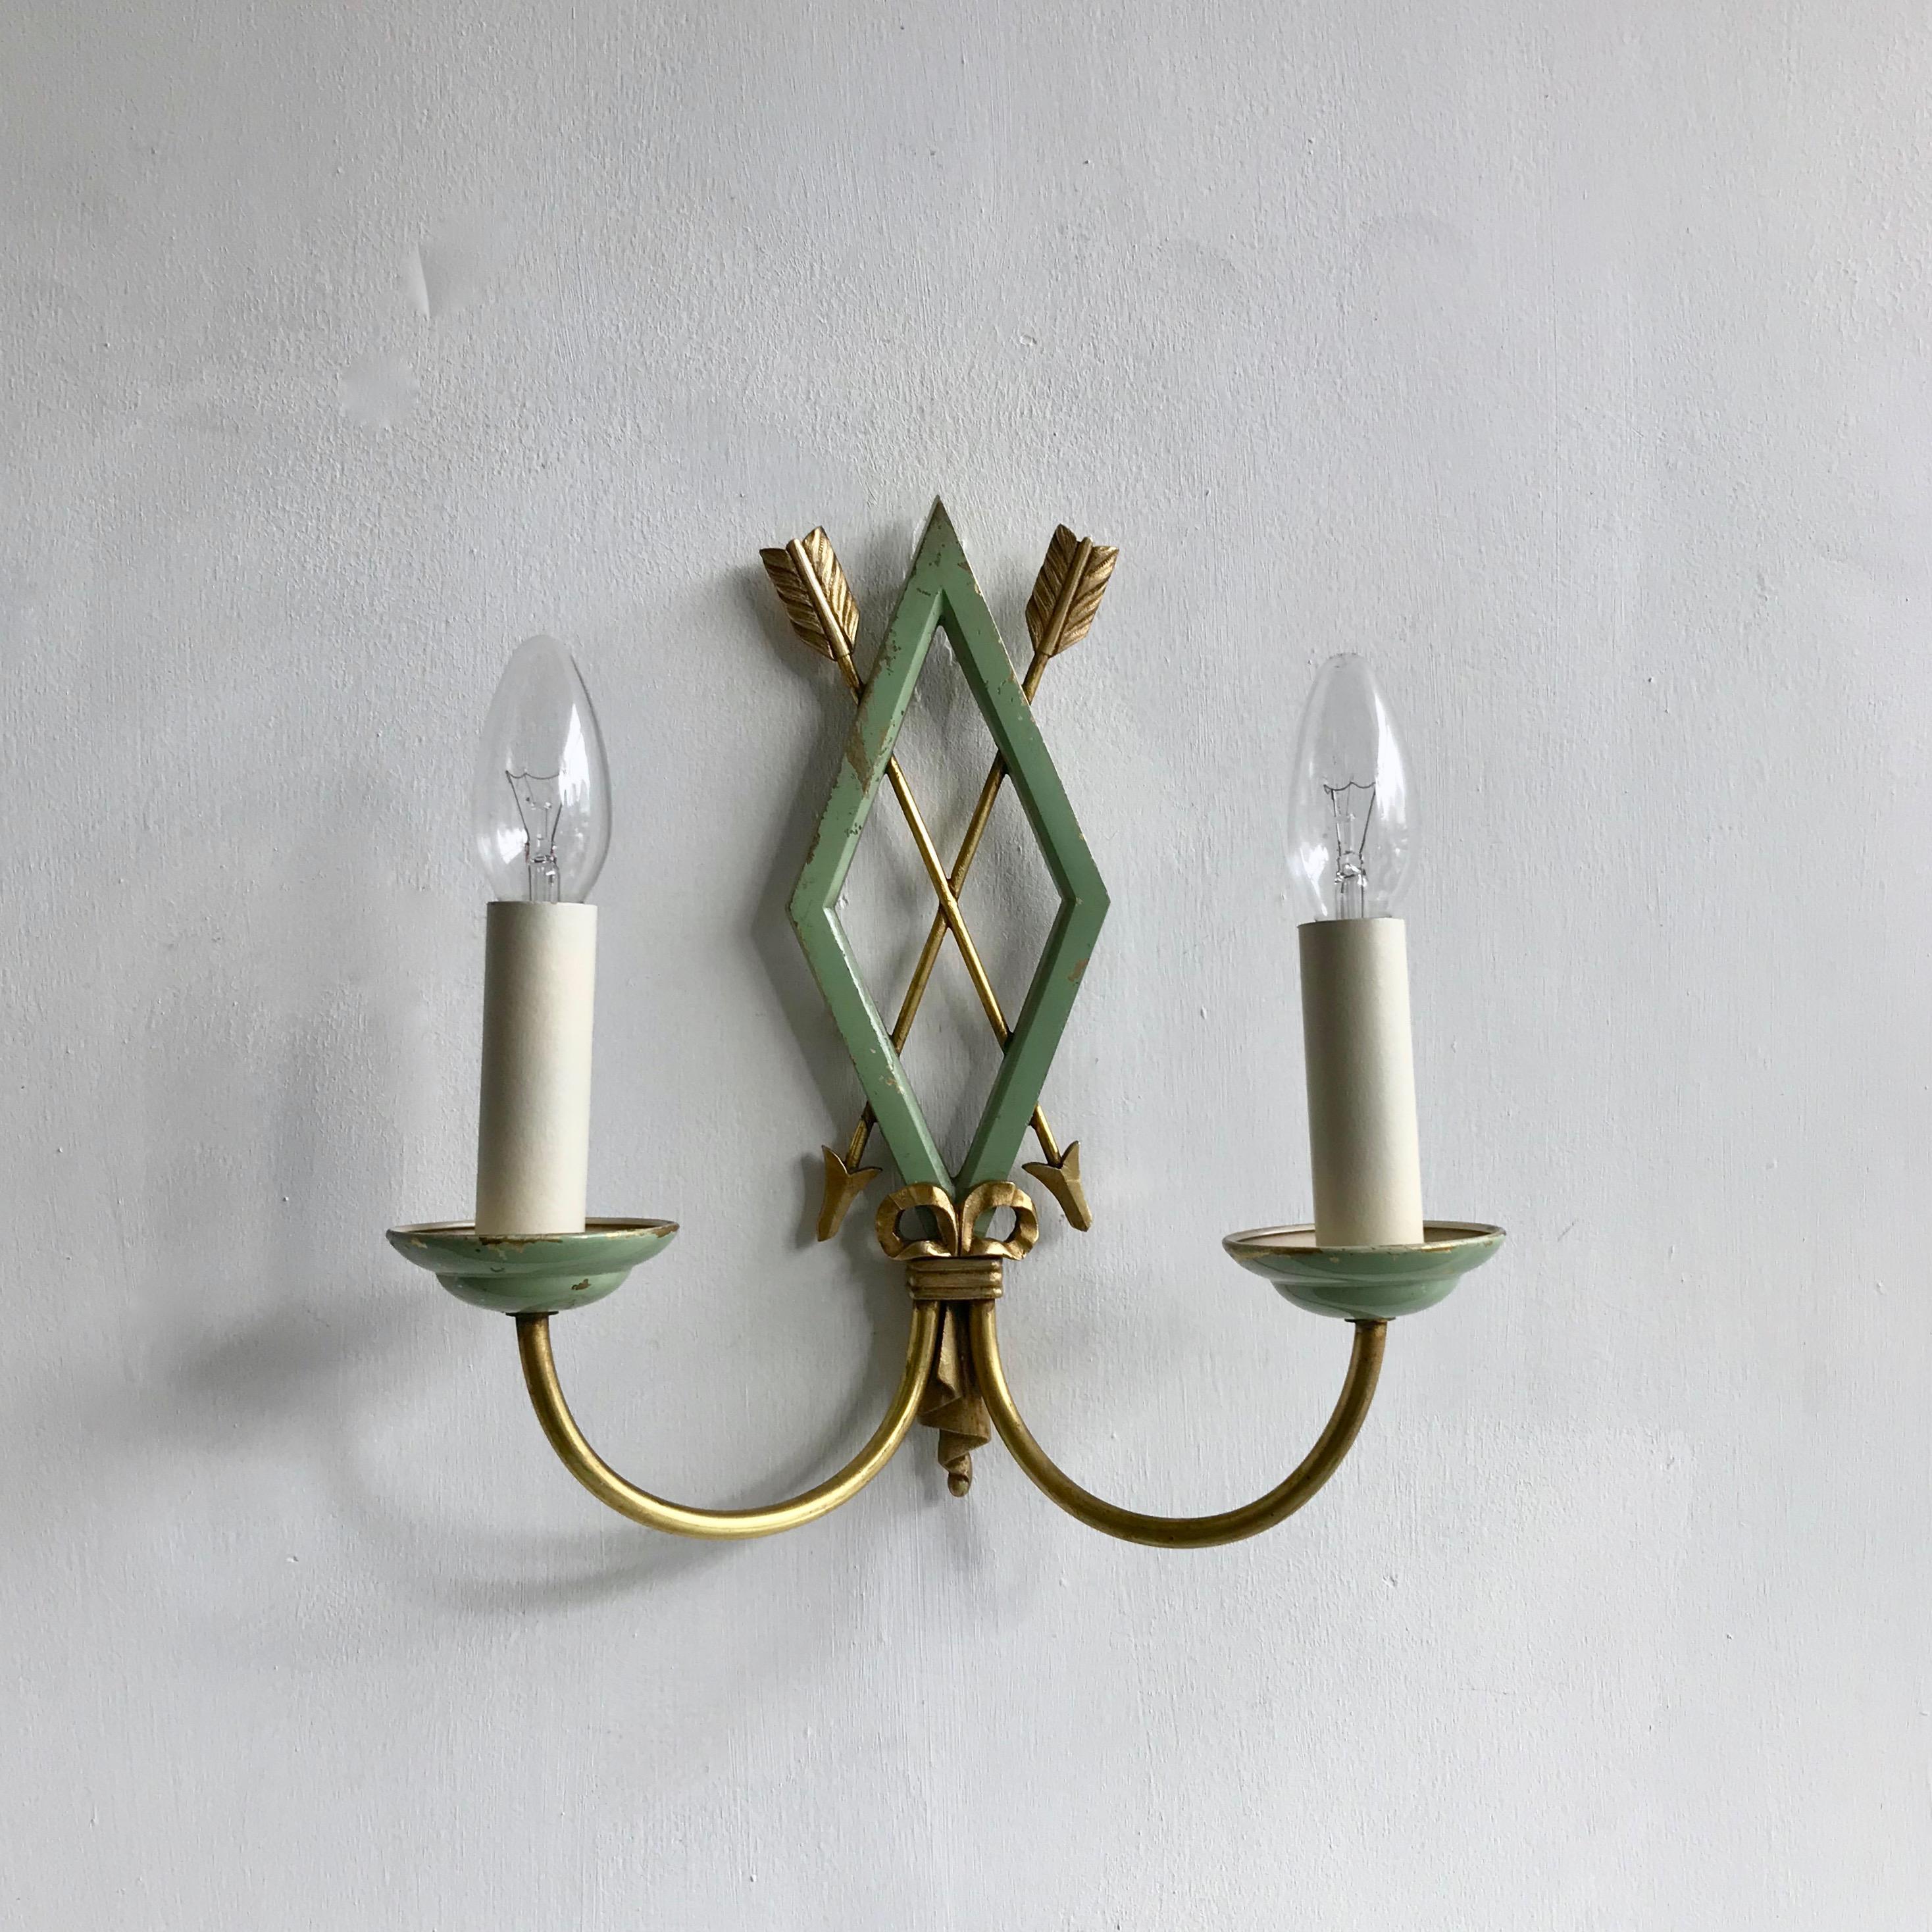 20th Century French Greened Toleware Wall Lights